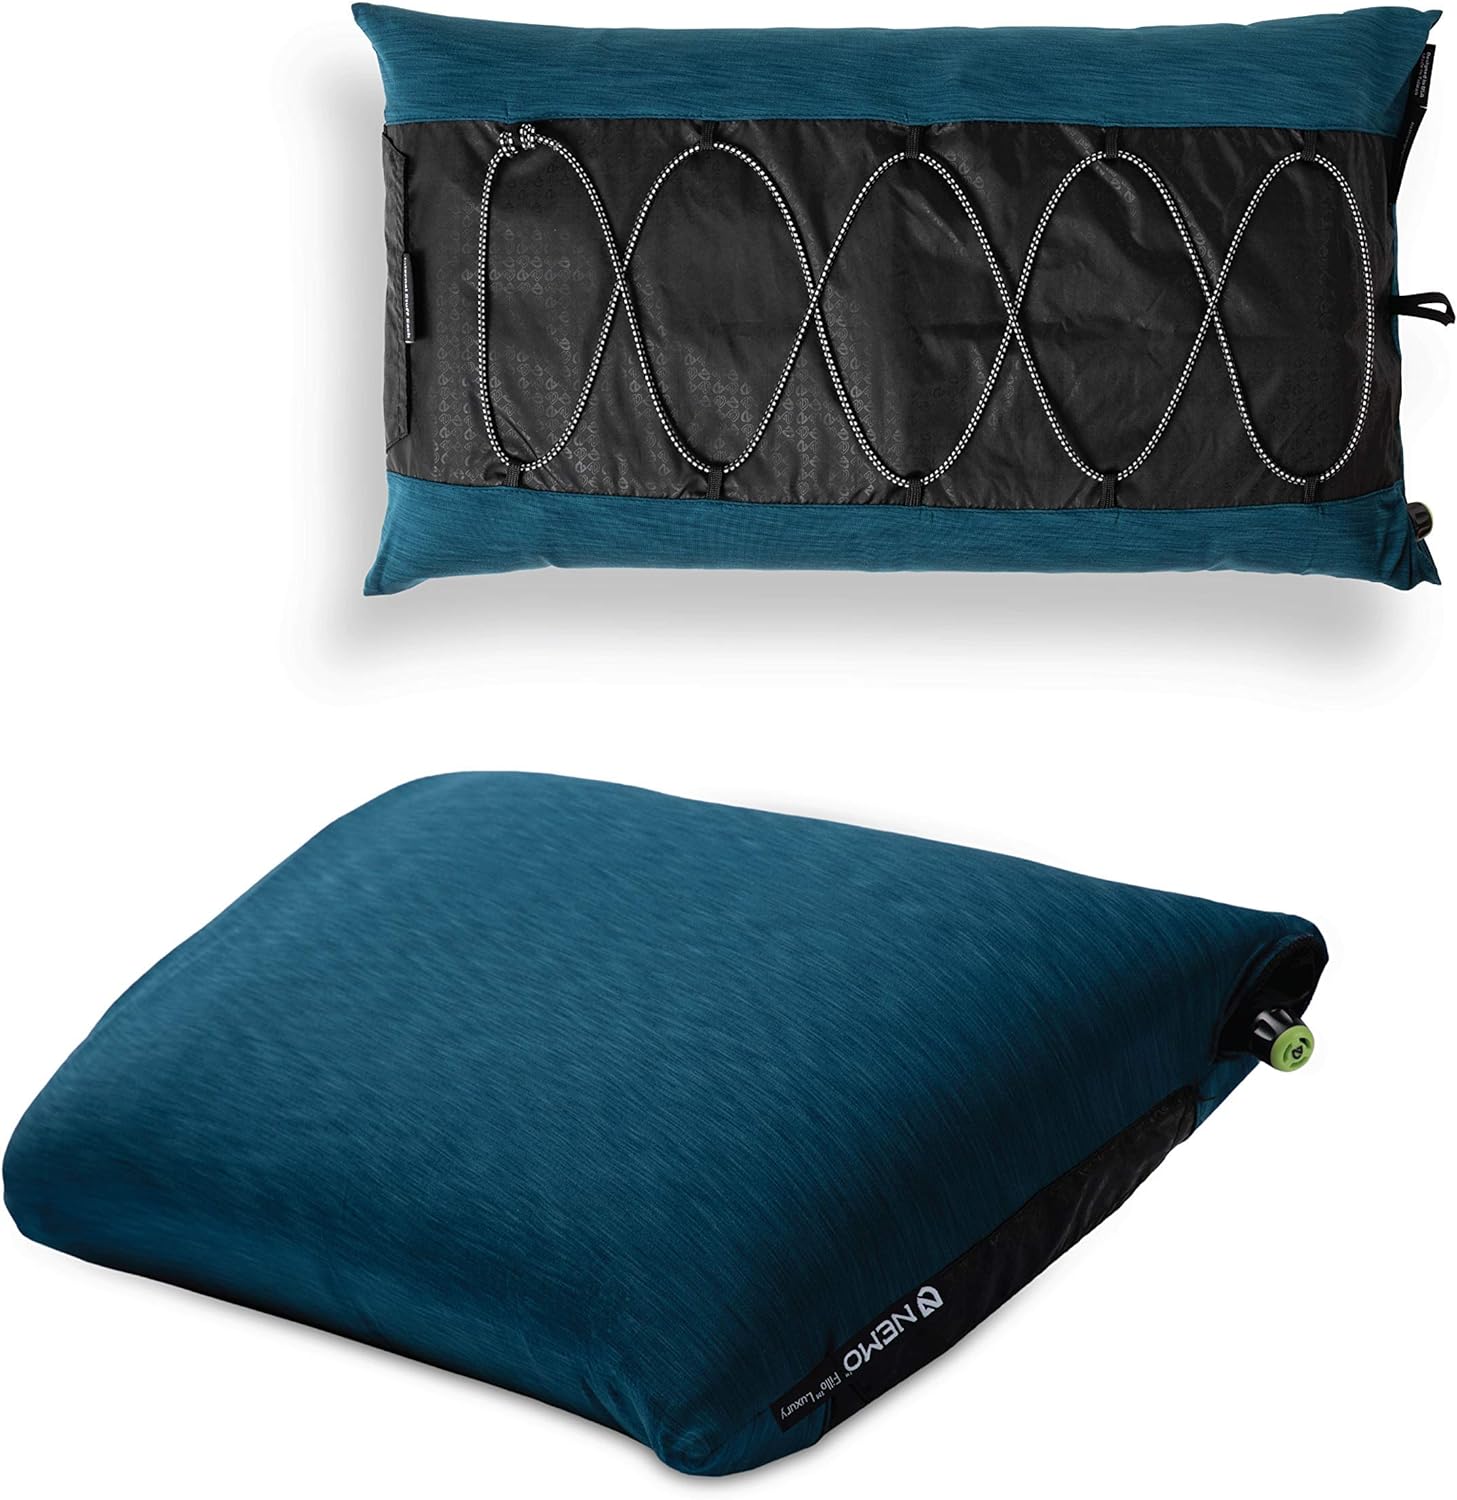 NEMO Fillo Luxury Pillow | Inflatable Pillow for Travel, Backpacking, and Camping, Abyss